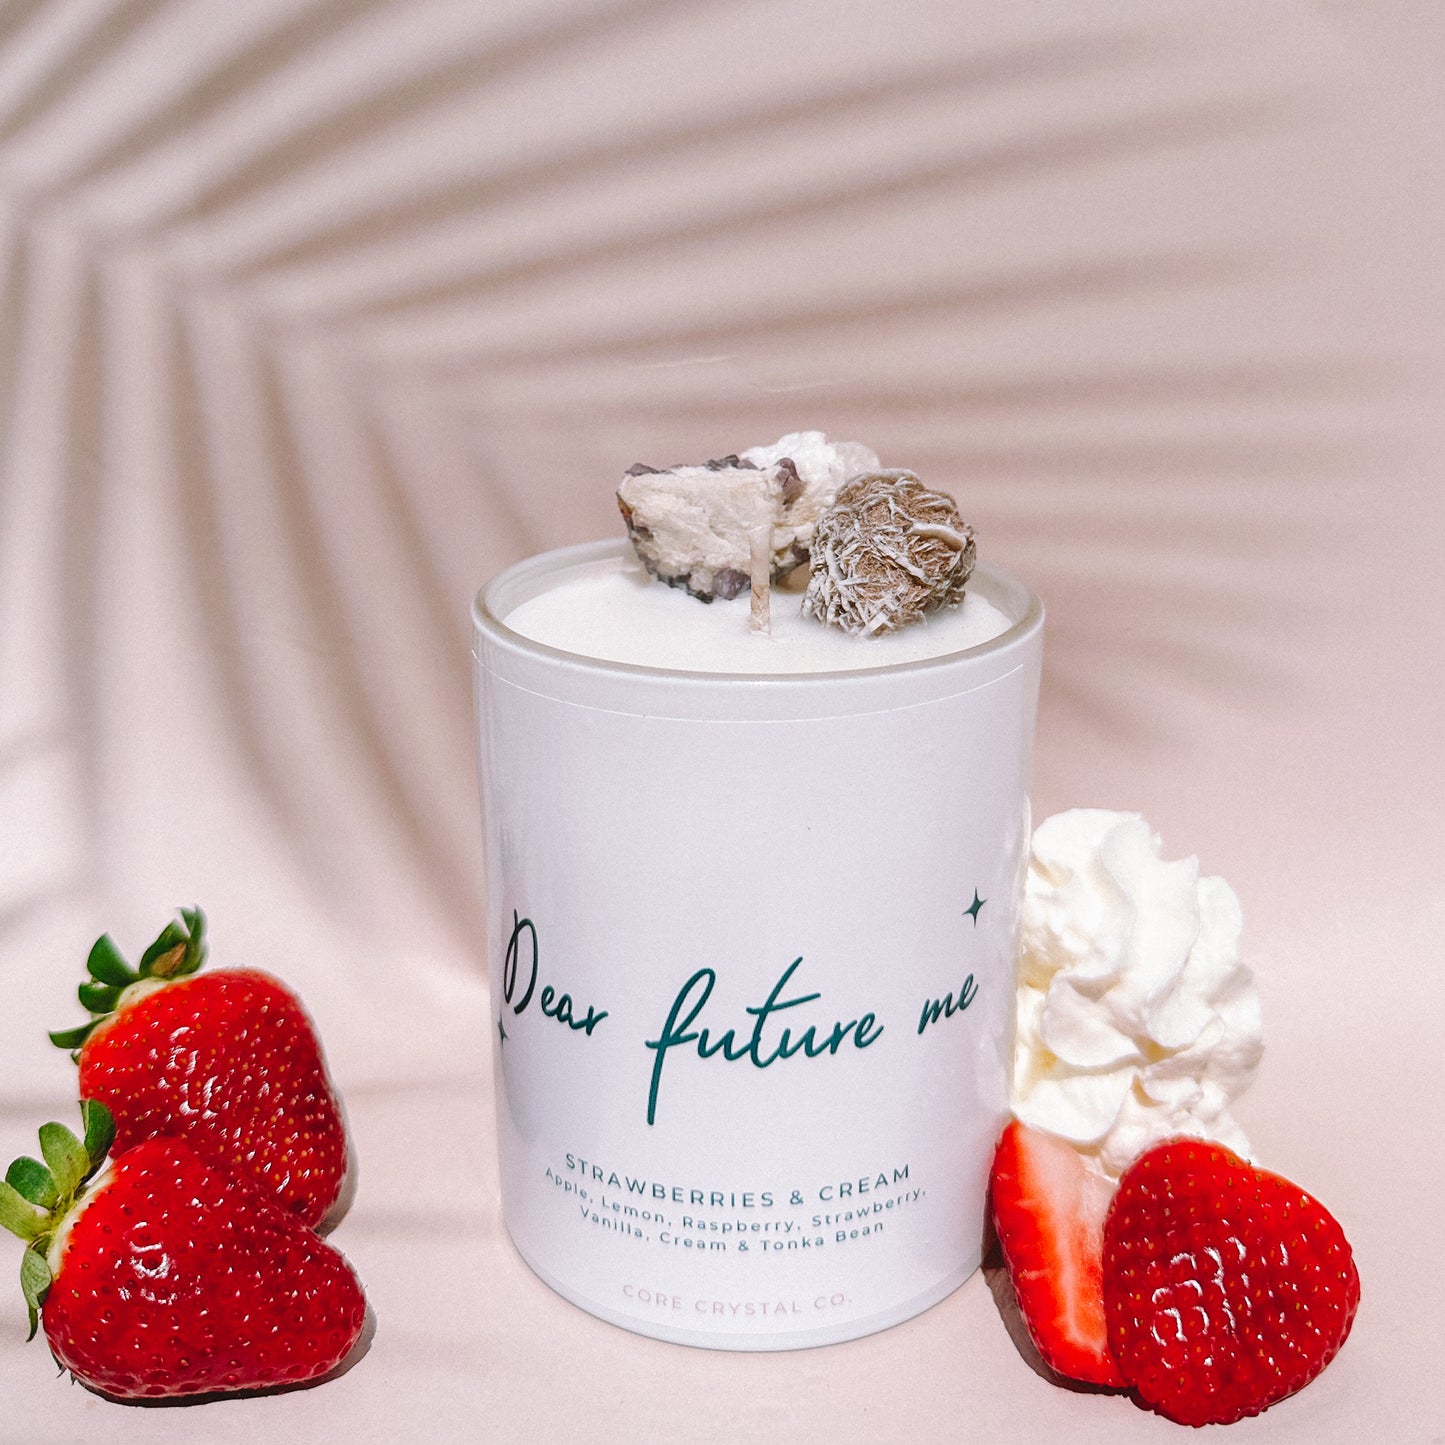 Dear Future Me Strawberries and Cream - Limited Edition Candle